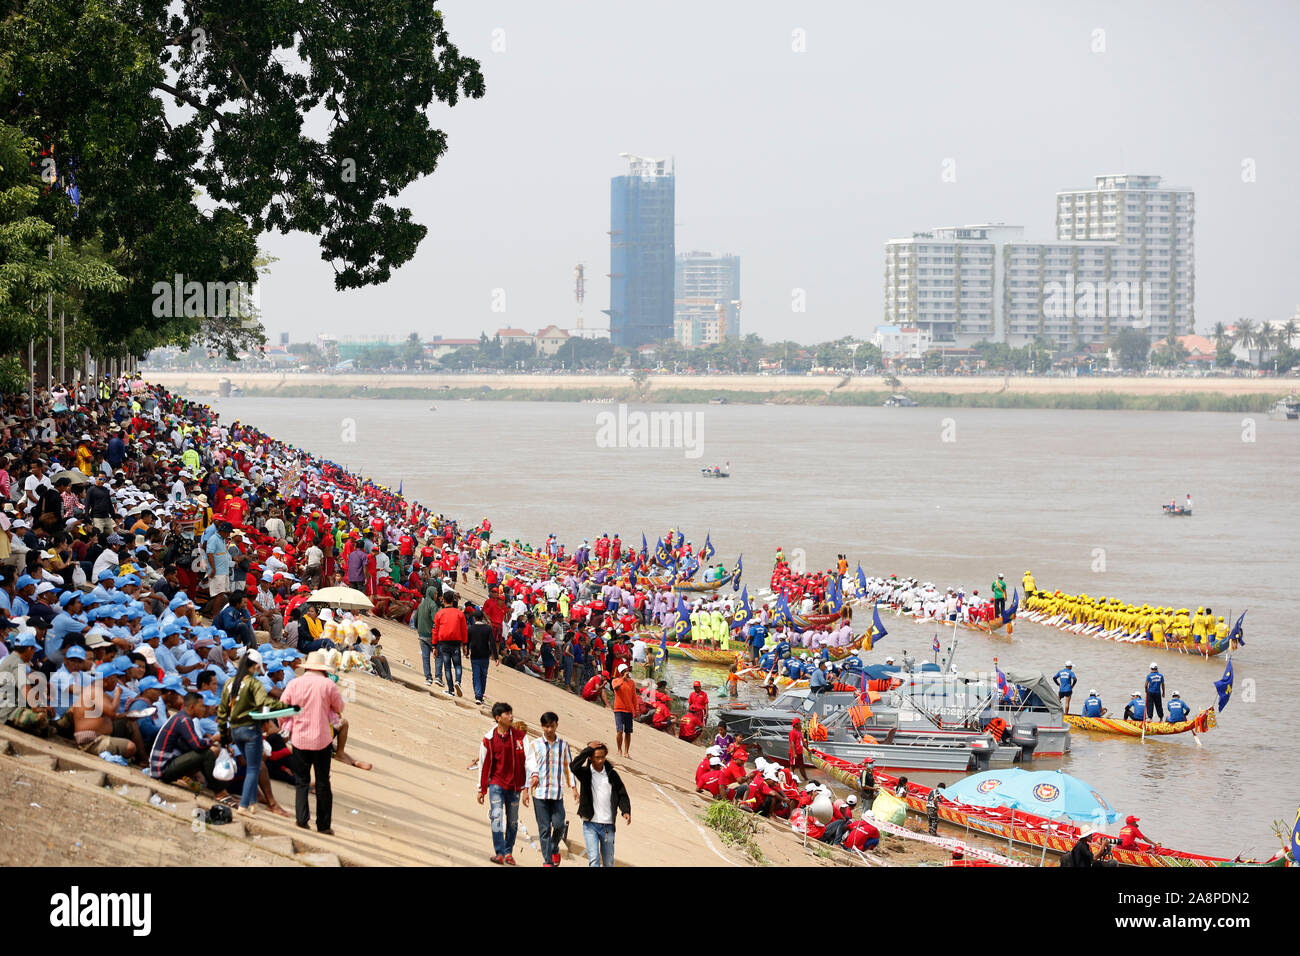 Phnom Penh. 10th Nov, 2019. People watch boat races in the Tonle Sap river during the Water Festival in Phnom Penh, Cambodia on Nov. 10, 2019. Tens of thousands of spectators flocked to the riverside here on Sunday for an 838-year-old boat racing tradition, which is held to celebrate the annual Water Festival. TO GO WITH "Feature: Tens of thousands cheer for centuries-old boat race in Cambodian capital" Credit: Sovannara/Xinhua/Alamy Live News Stock Photo